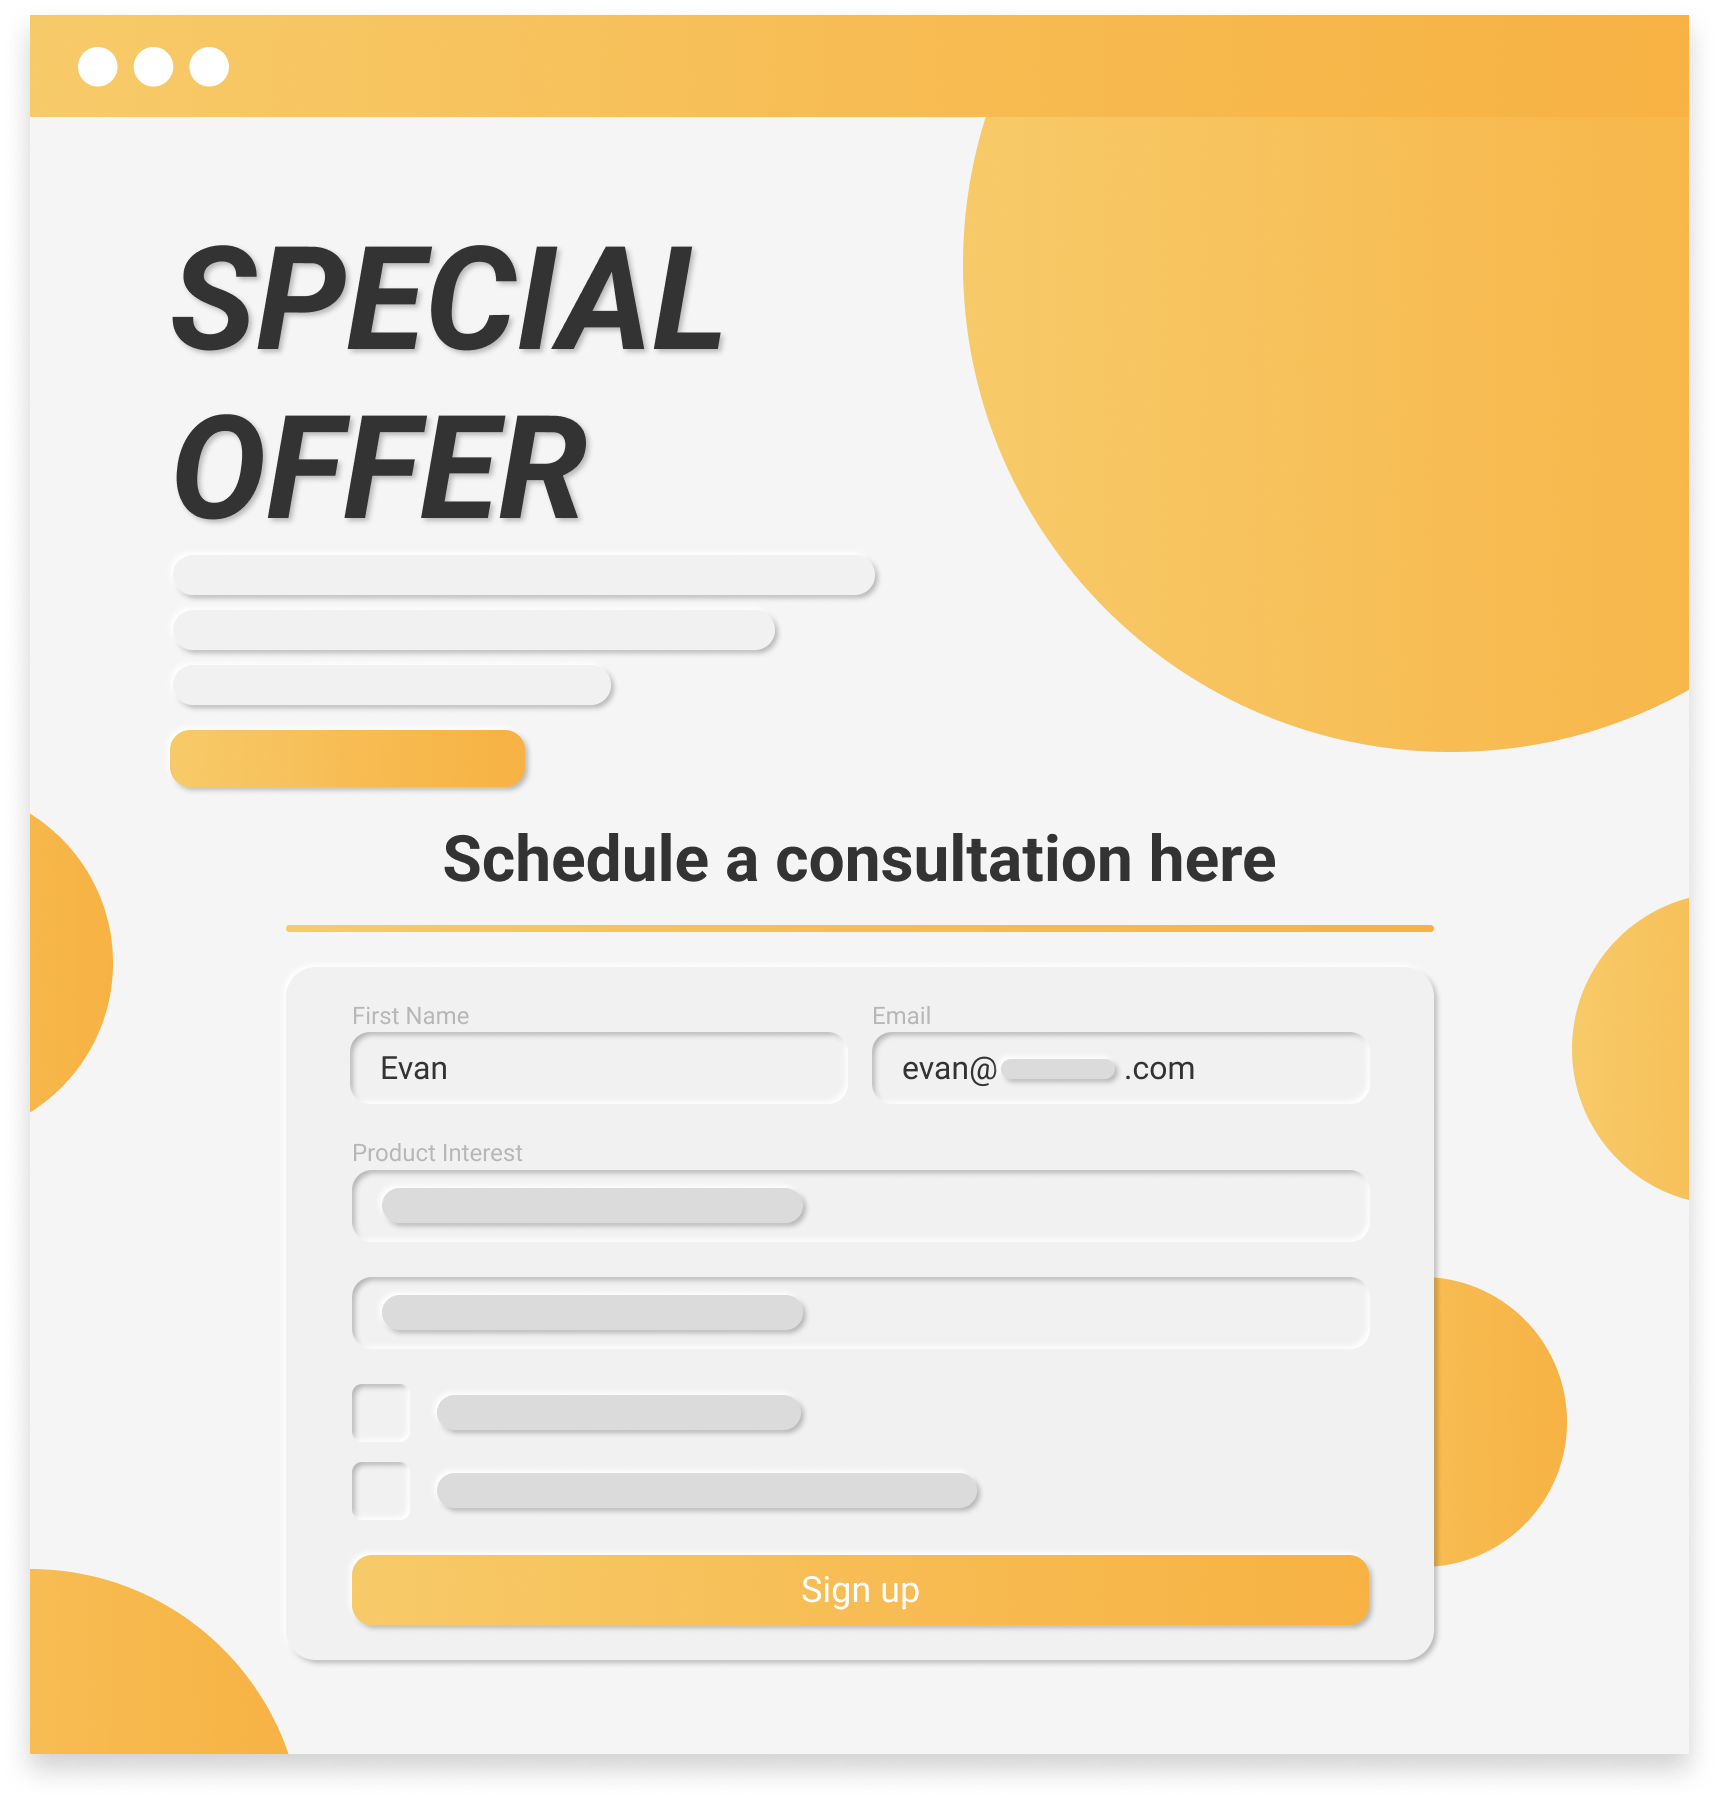 Special offer sign up form from a landing page